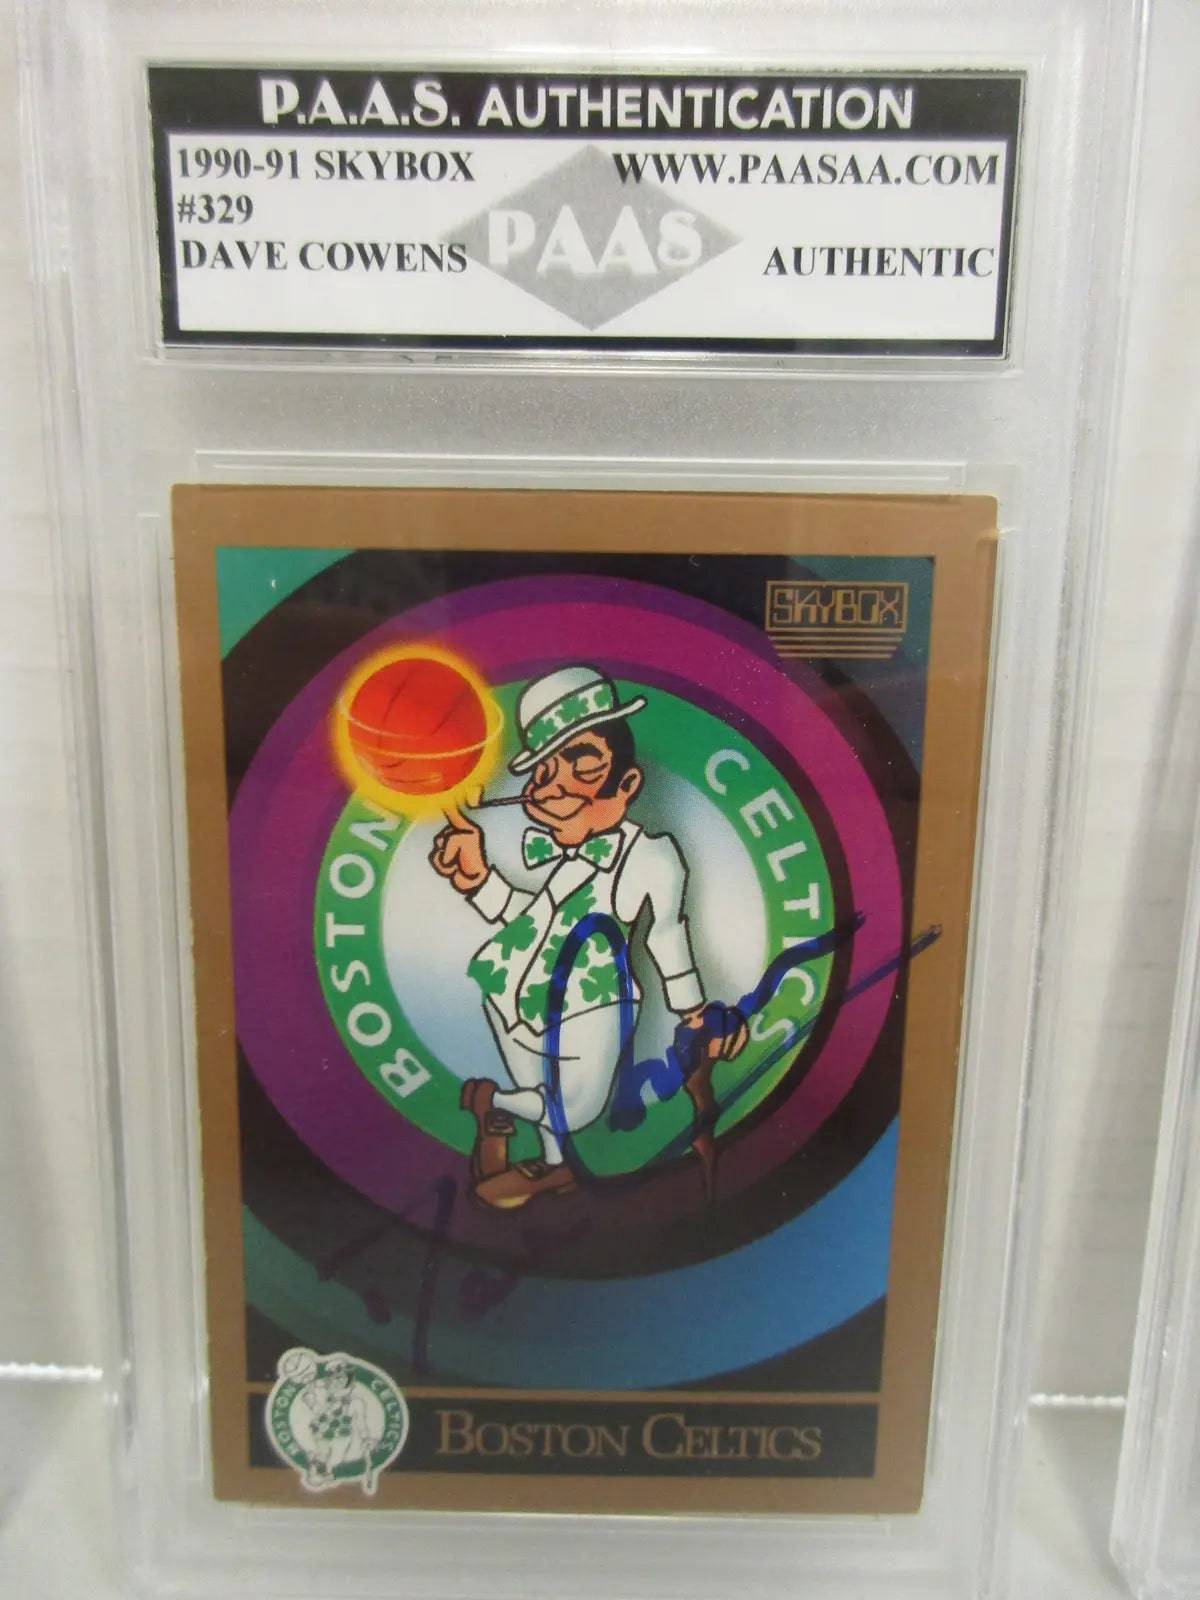 Dave Cowens of the Boston Celtics signed autographed slabbed sports card PAAS AU